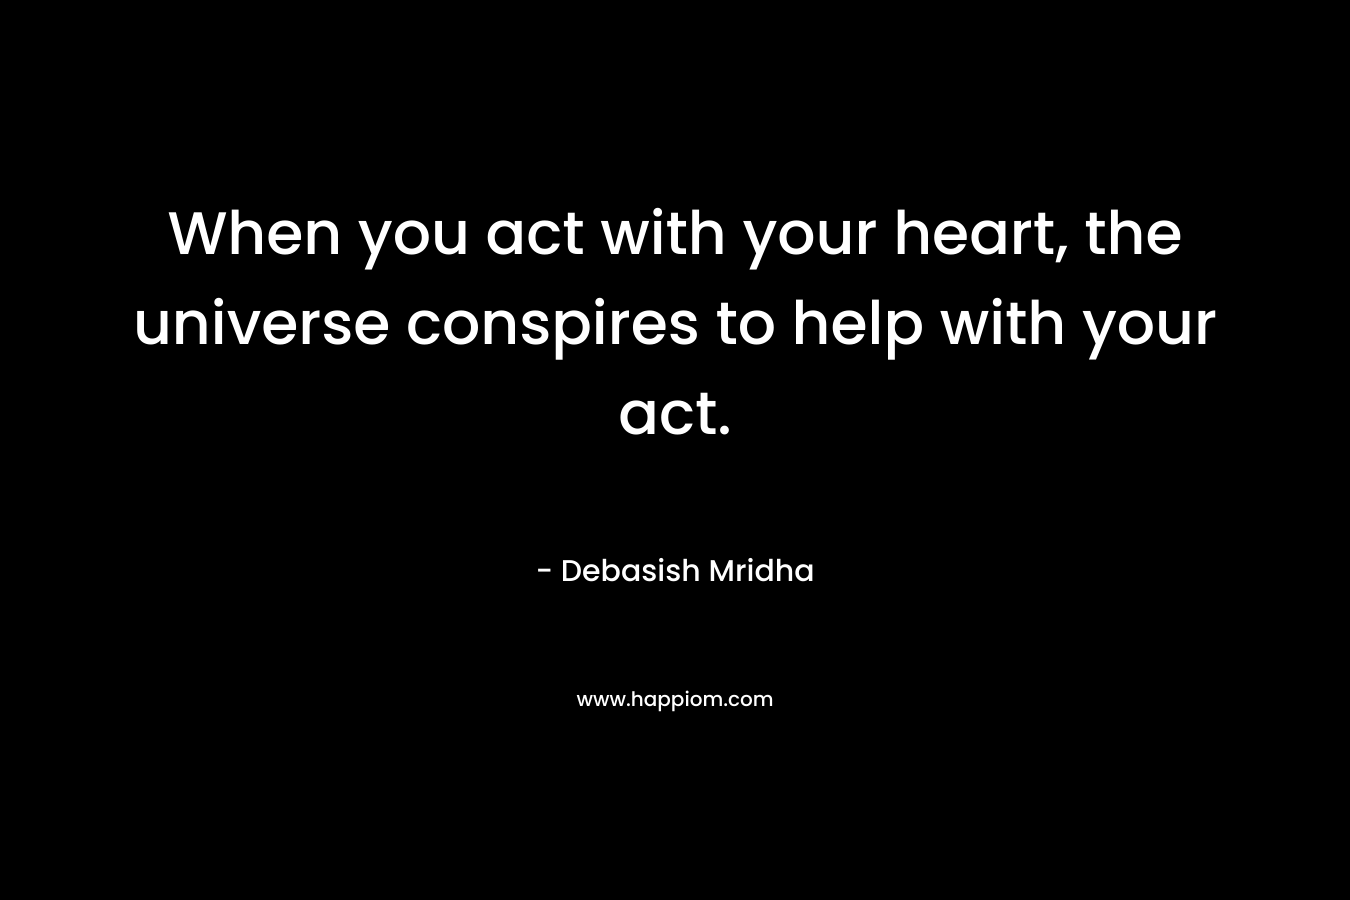 When you act with your heart, the universe conspires to help with your act. – Debasish Mridha